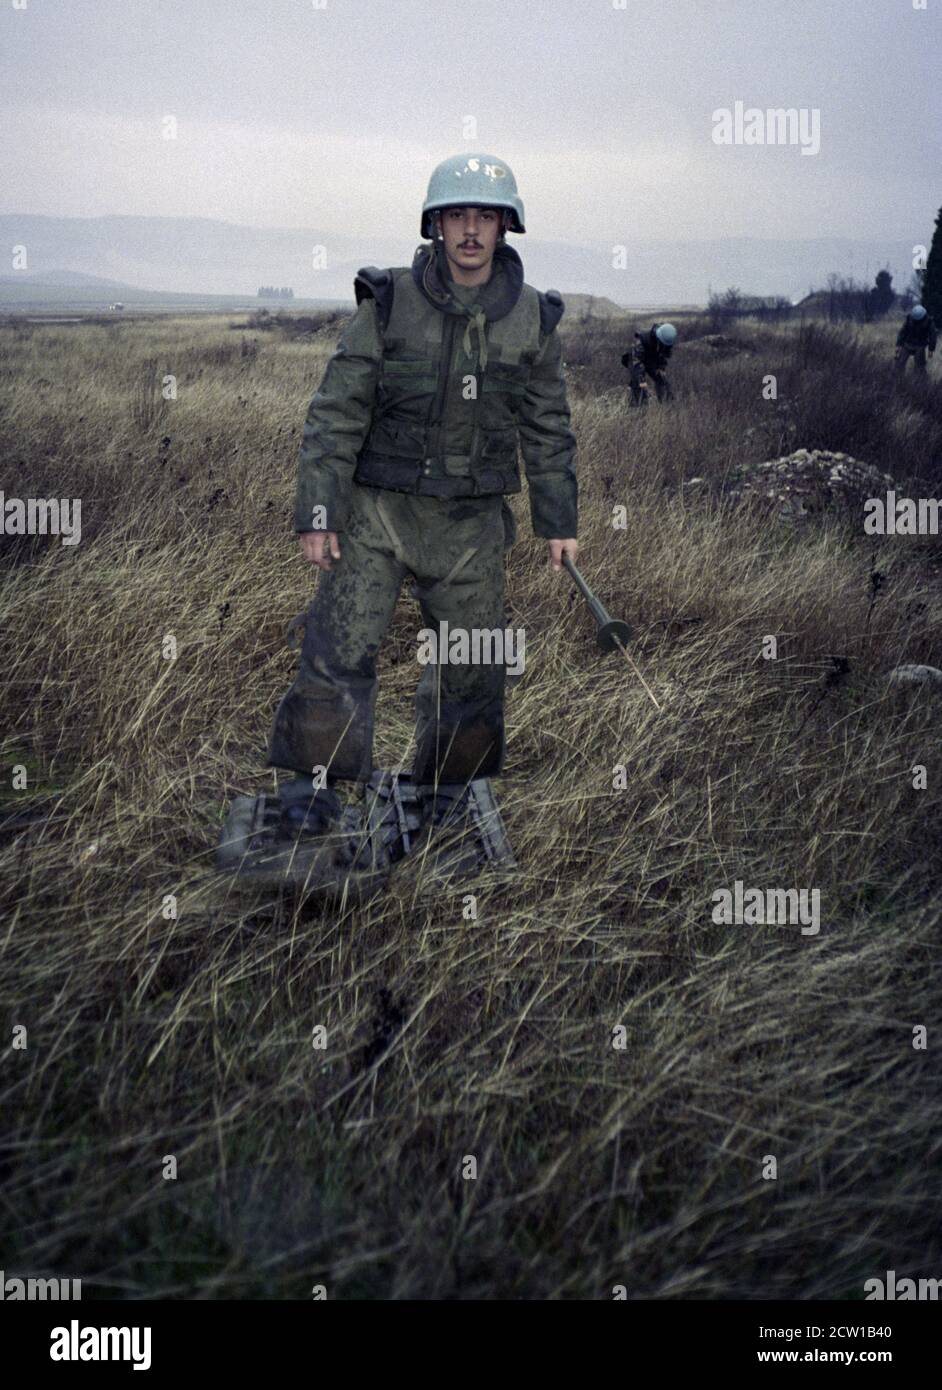 18th December 1995 During the war in Bosnia: French soldiers conducting mine clearance in heavy rain, around the runway at Mostar airport. Stock Photo